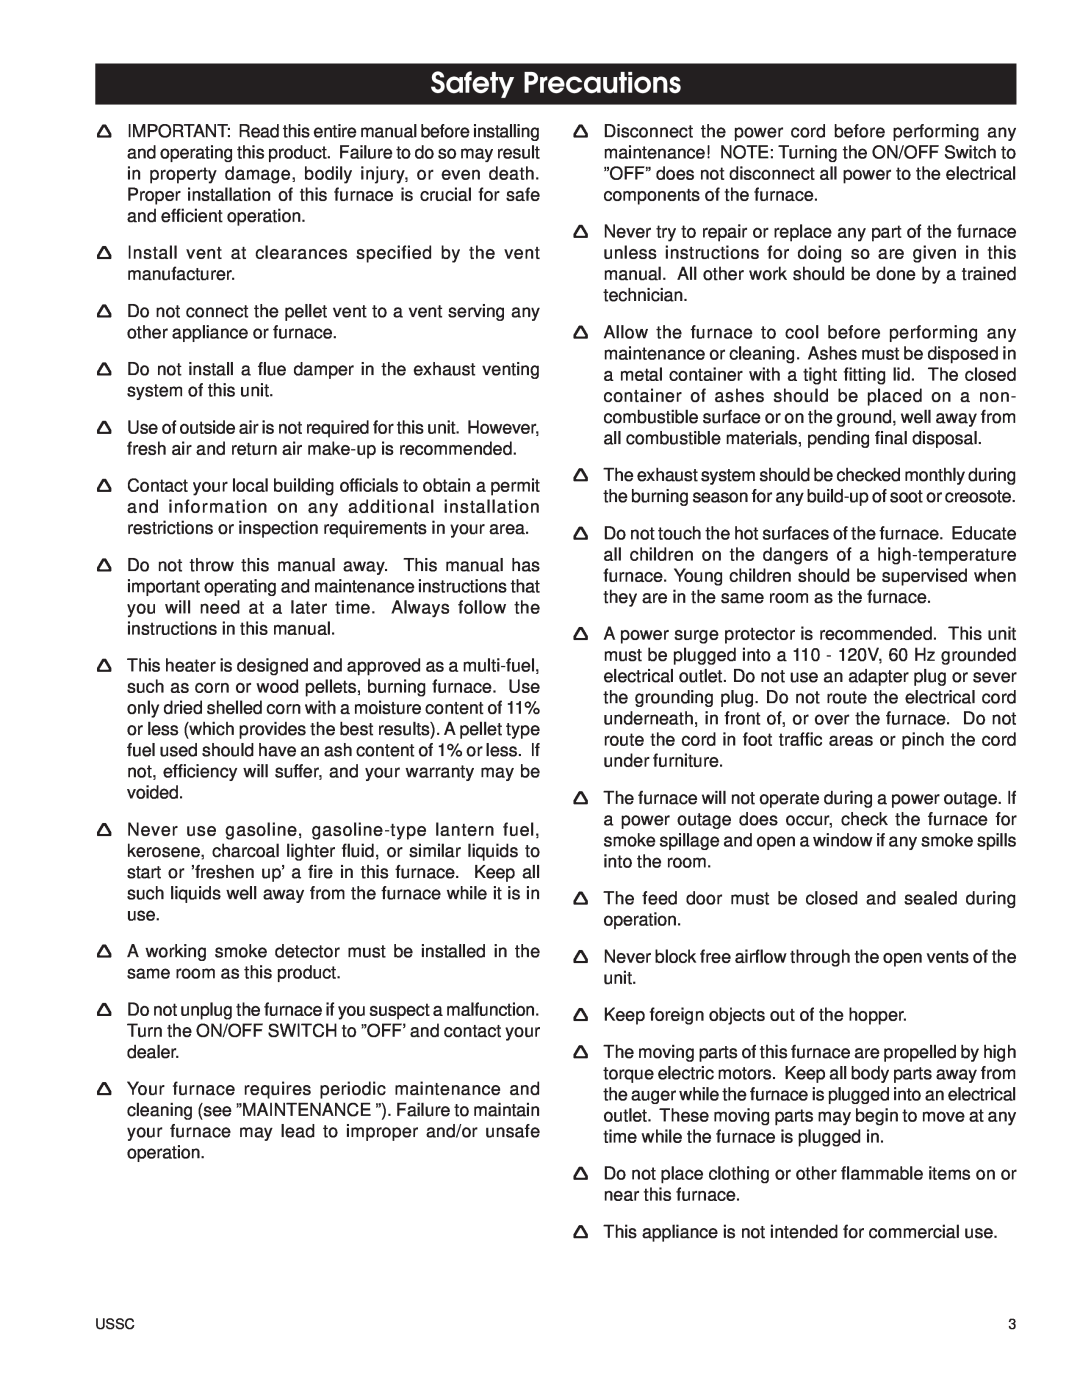 United States Stove 6100 owner manual Safety Precautions 